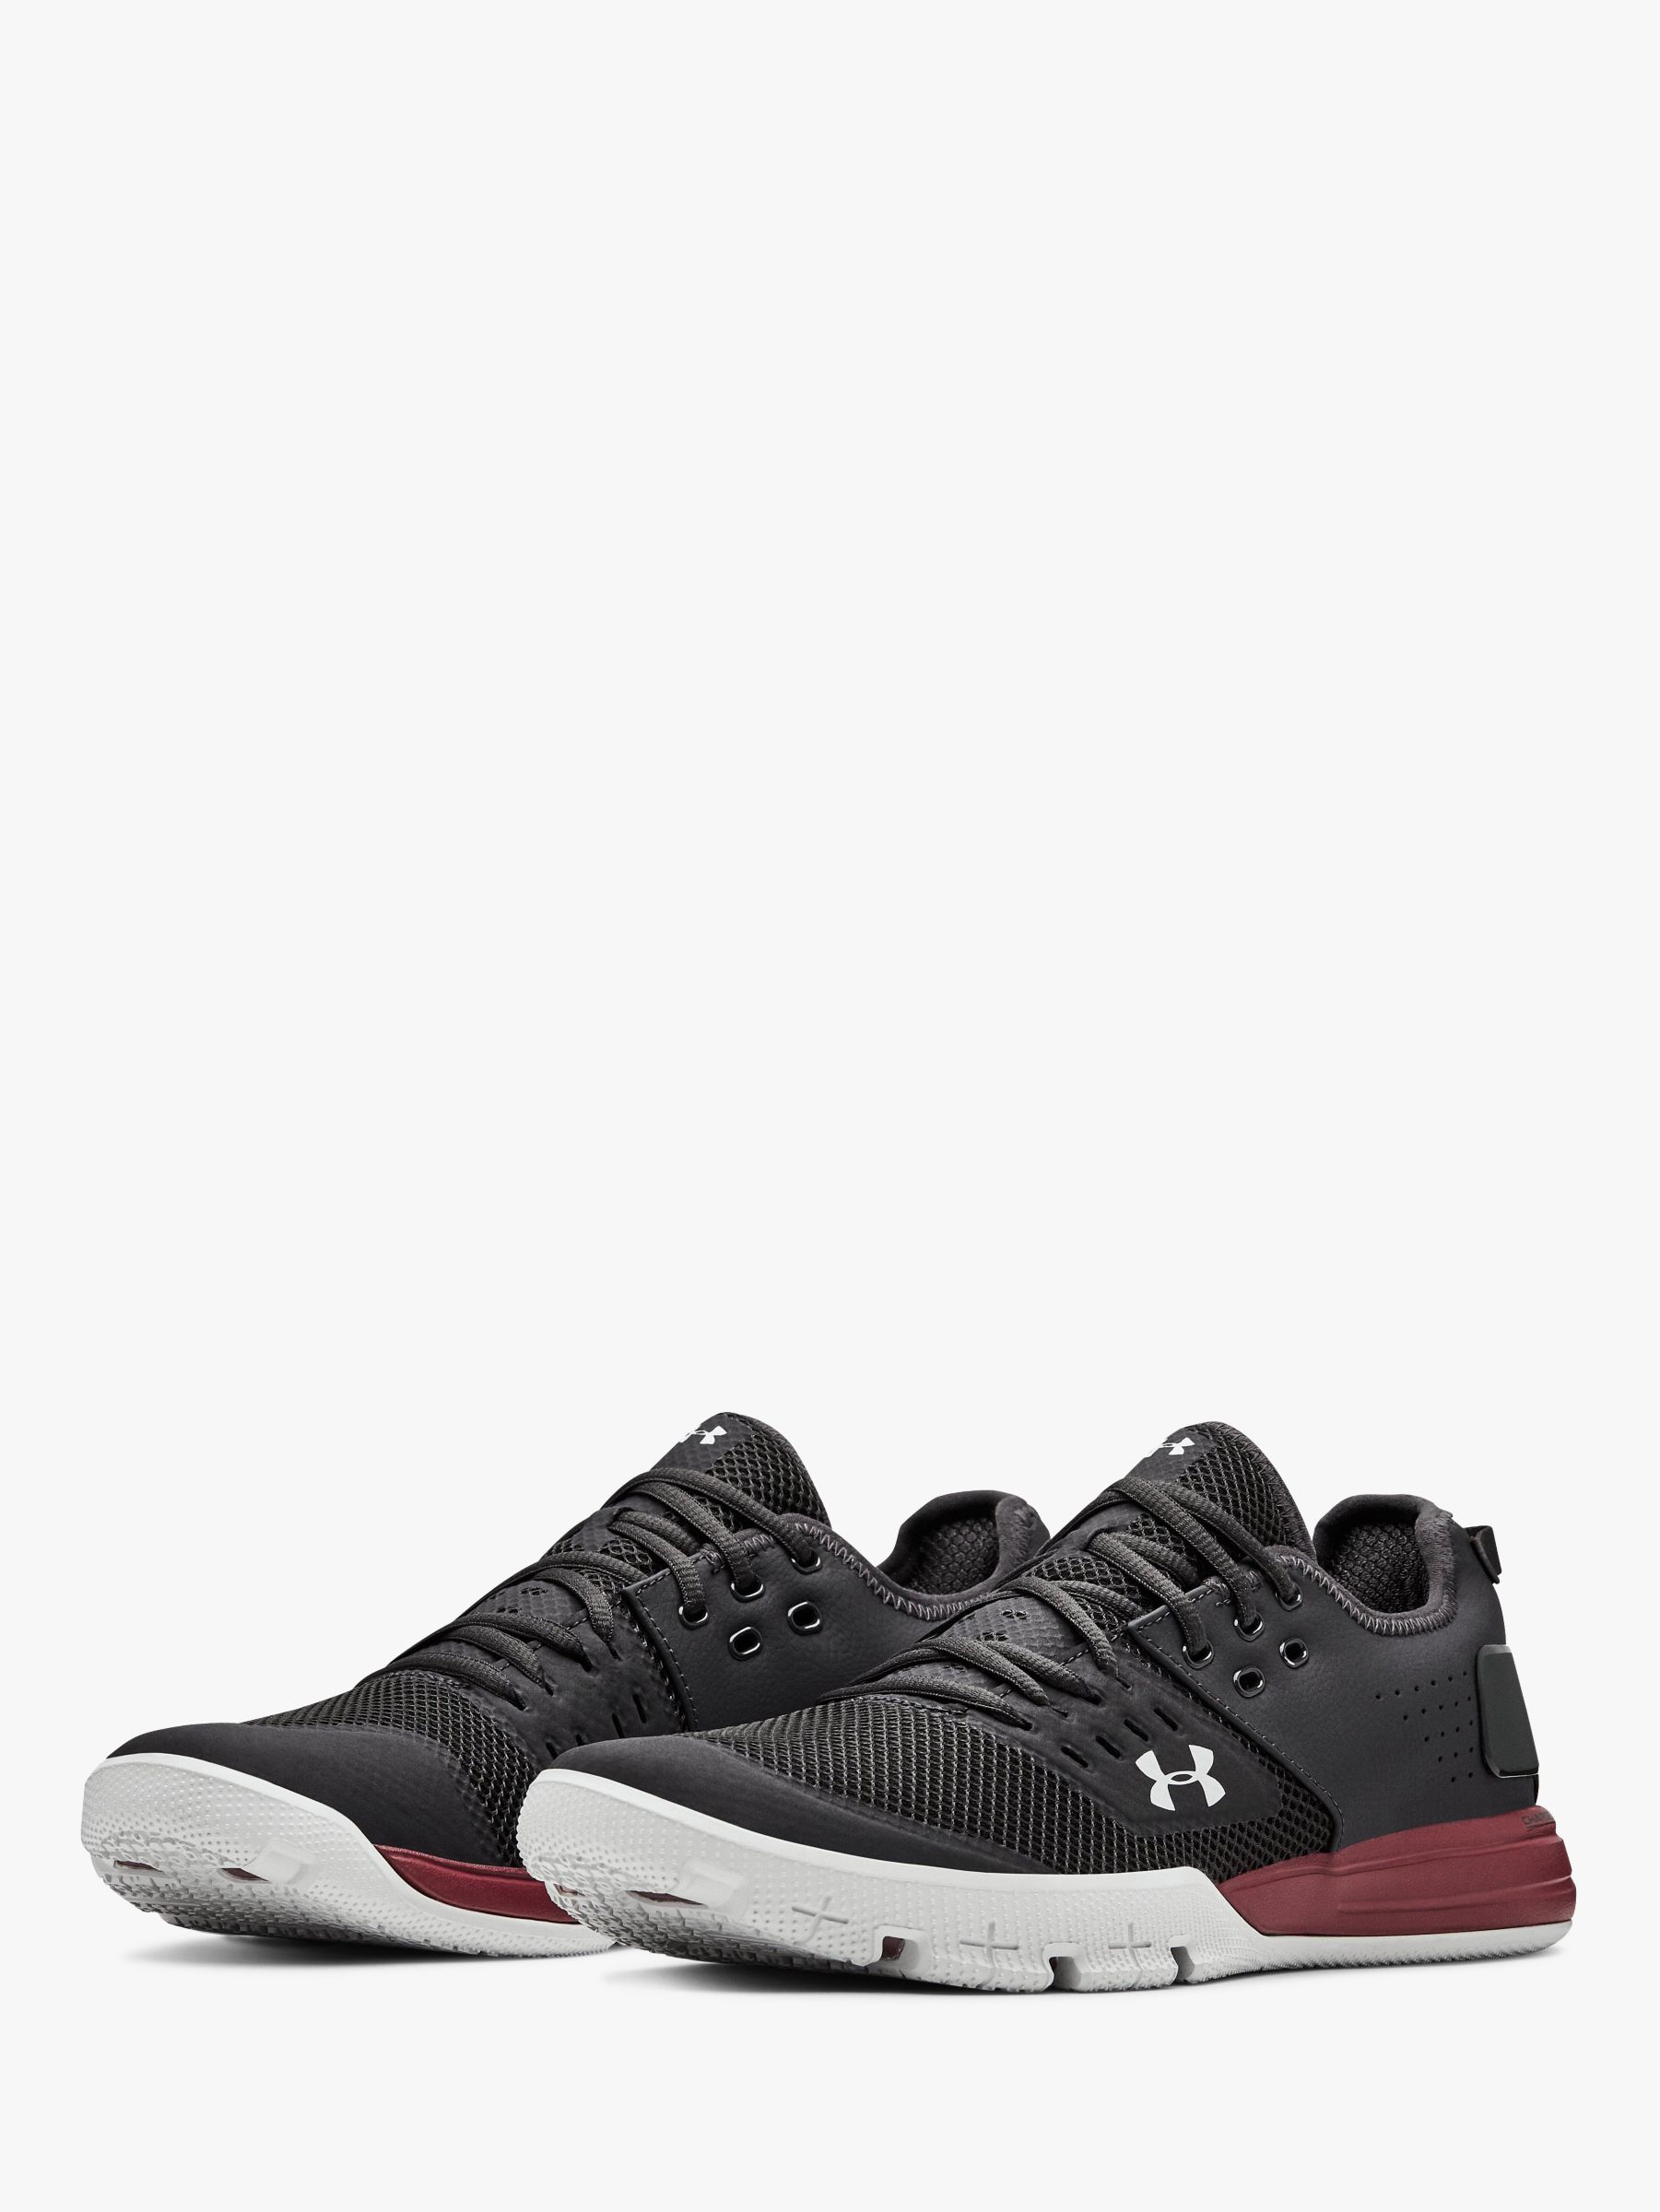 Under Armour Charged Ultimate 3.0 Men's 